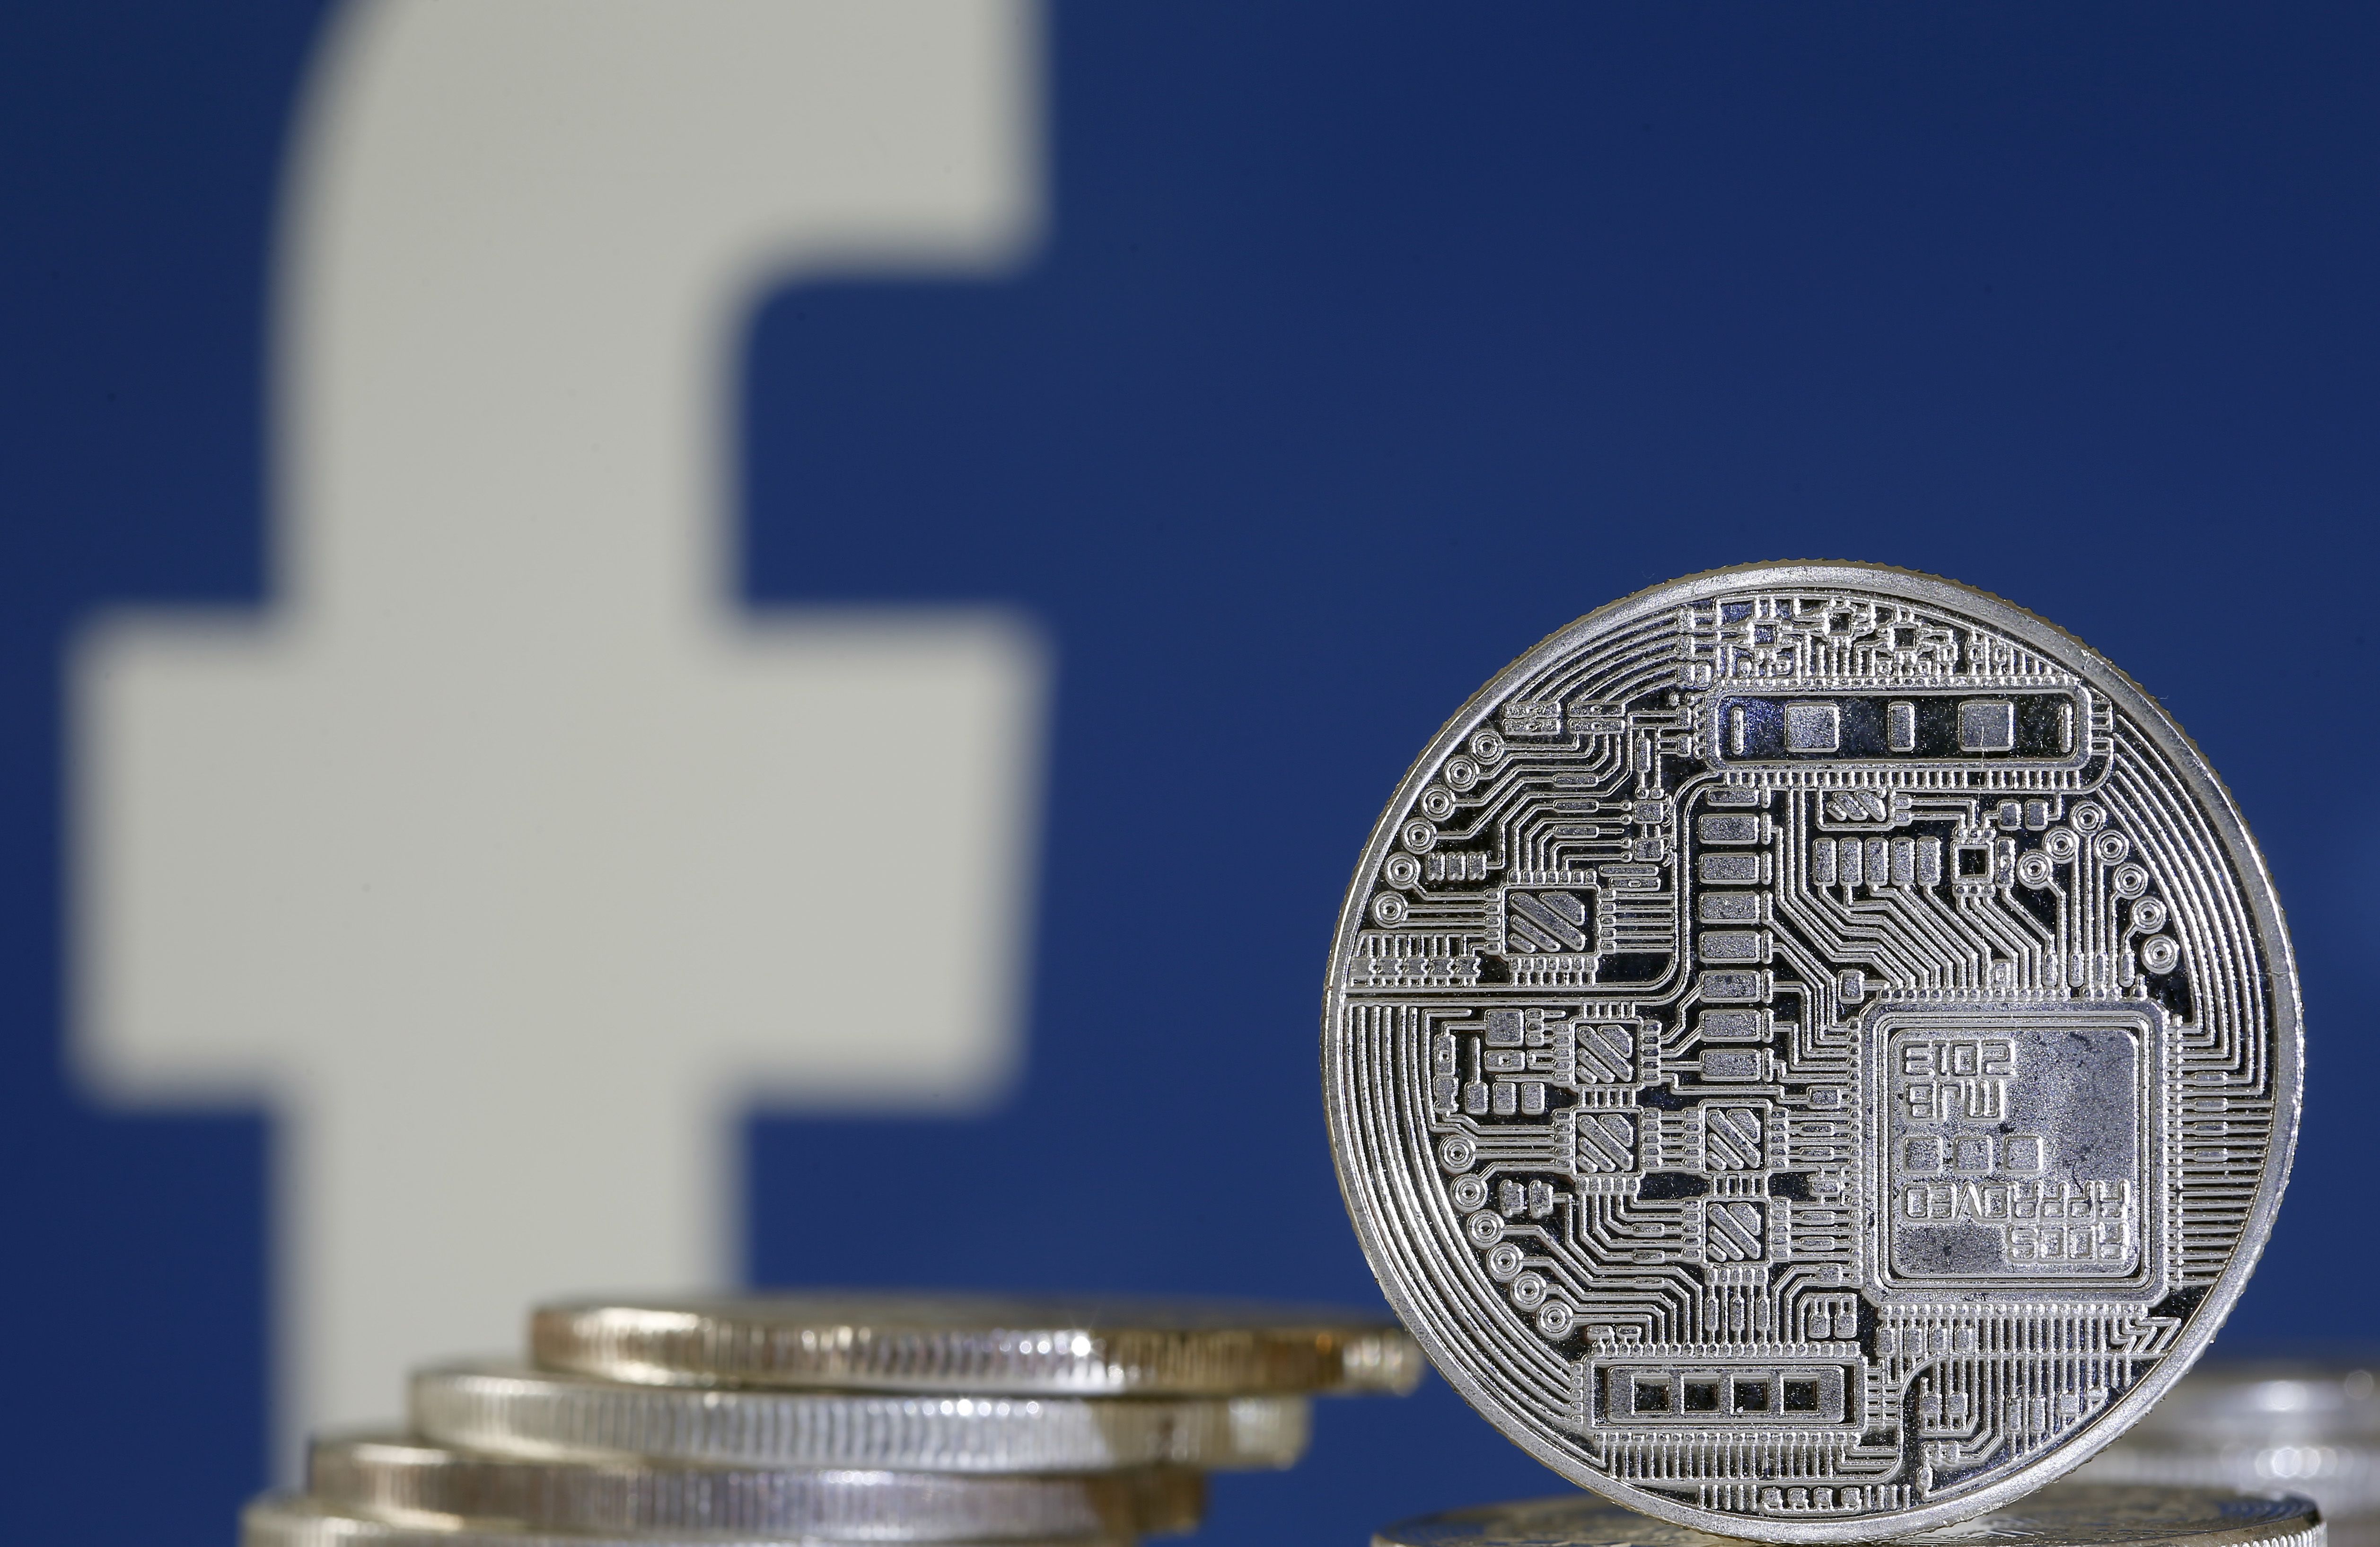 Facebook Libra cryptocurrency faces political pushback in Europe